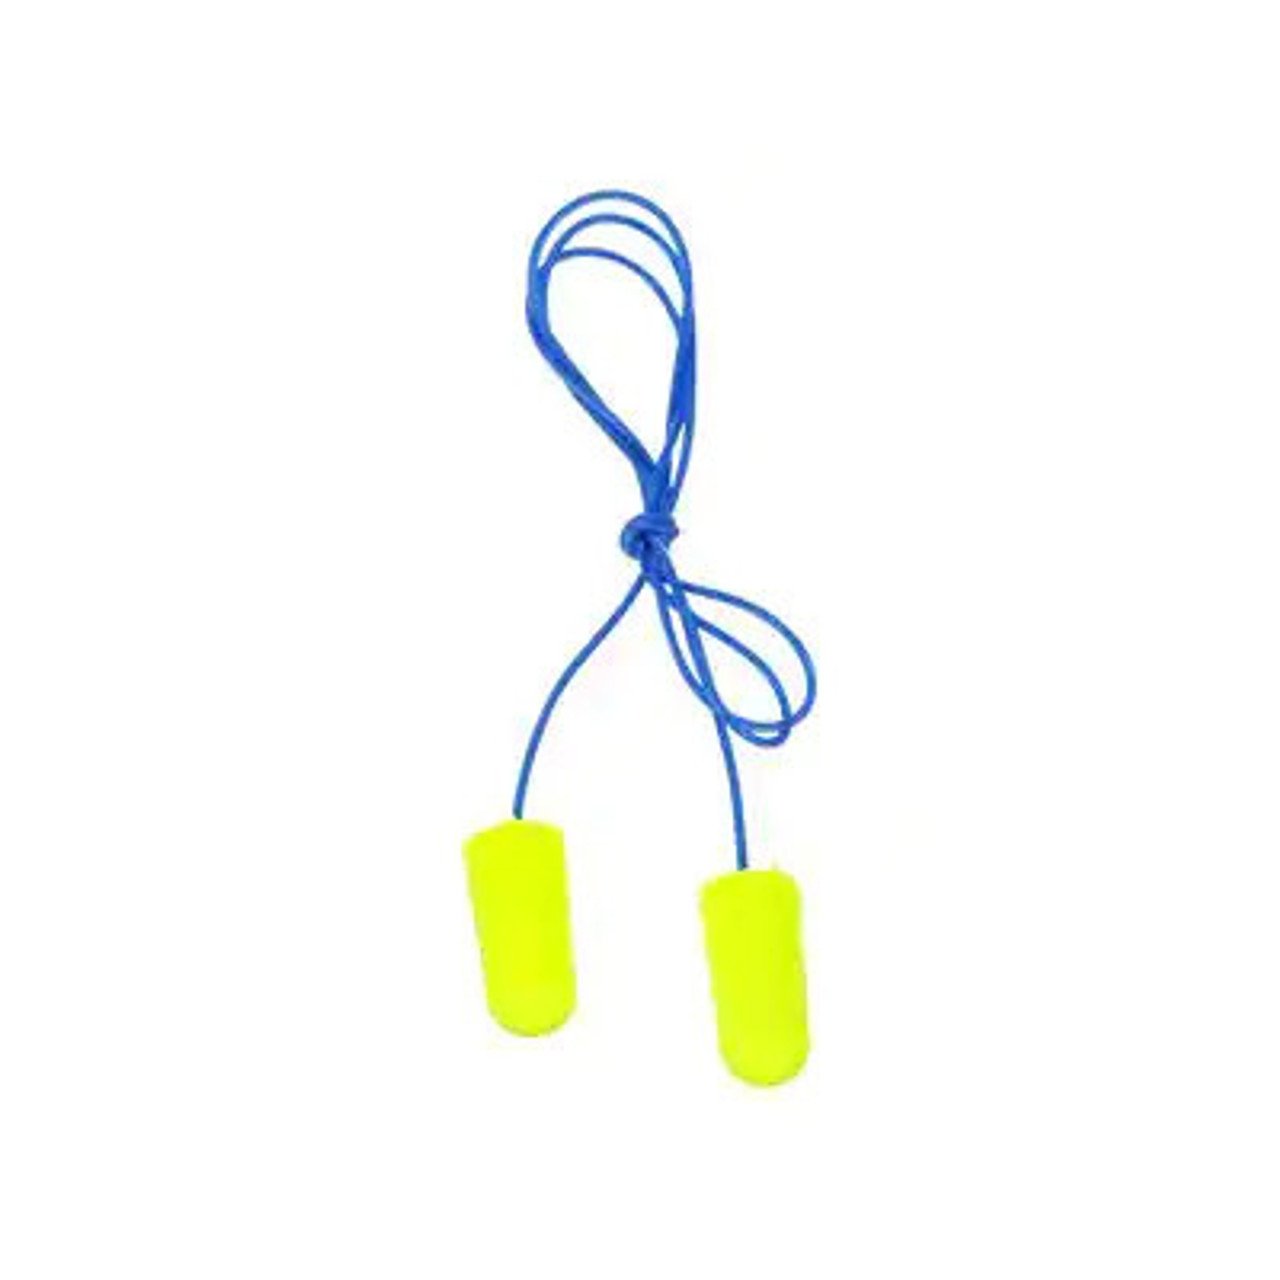 3M™ E-A-Rsoft™ Grippers™ Earplugs 312-6001, Corded (200 PAIRS PER BOX) :  Earplugs : Hearing Protection